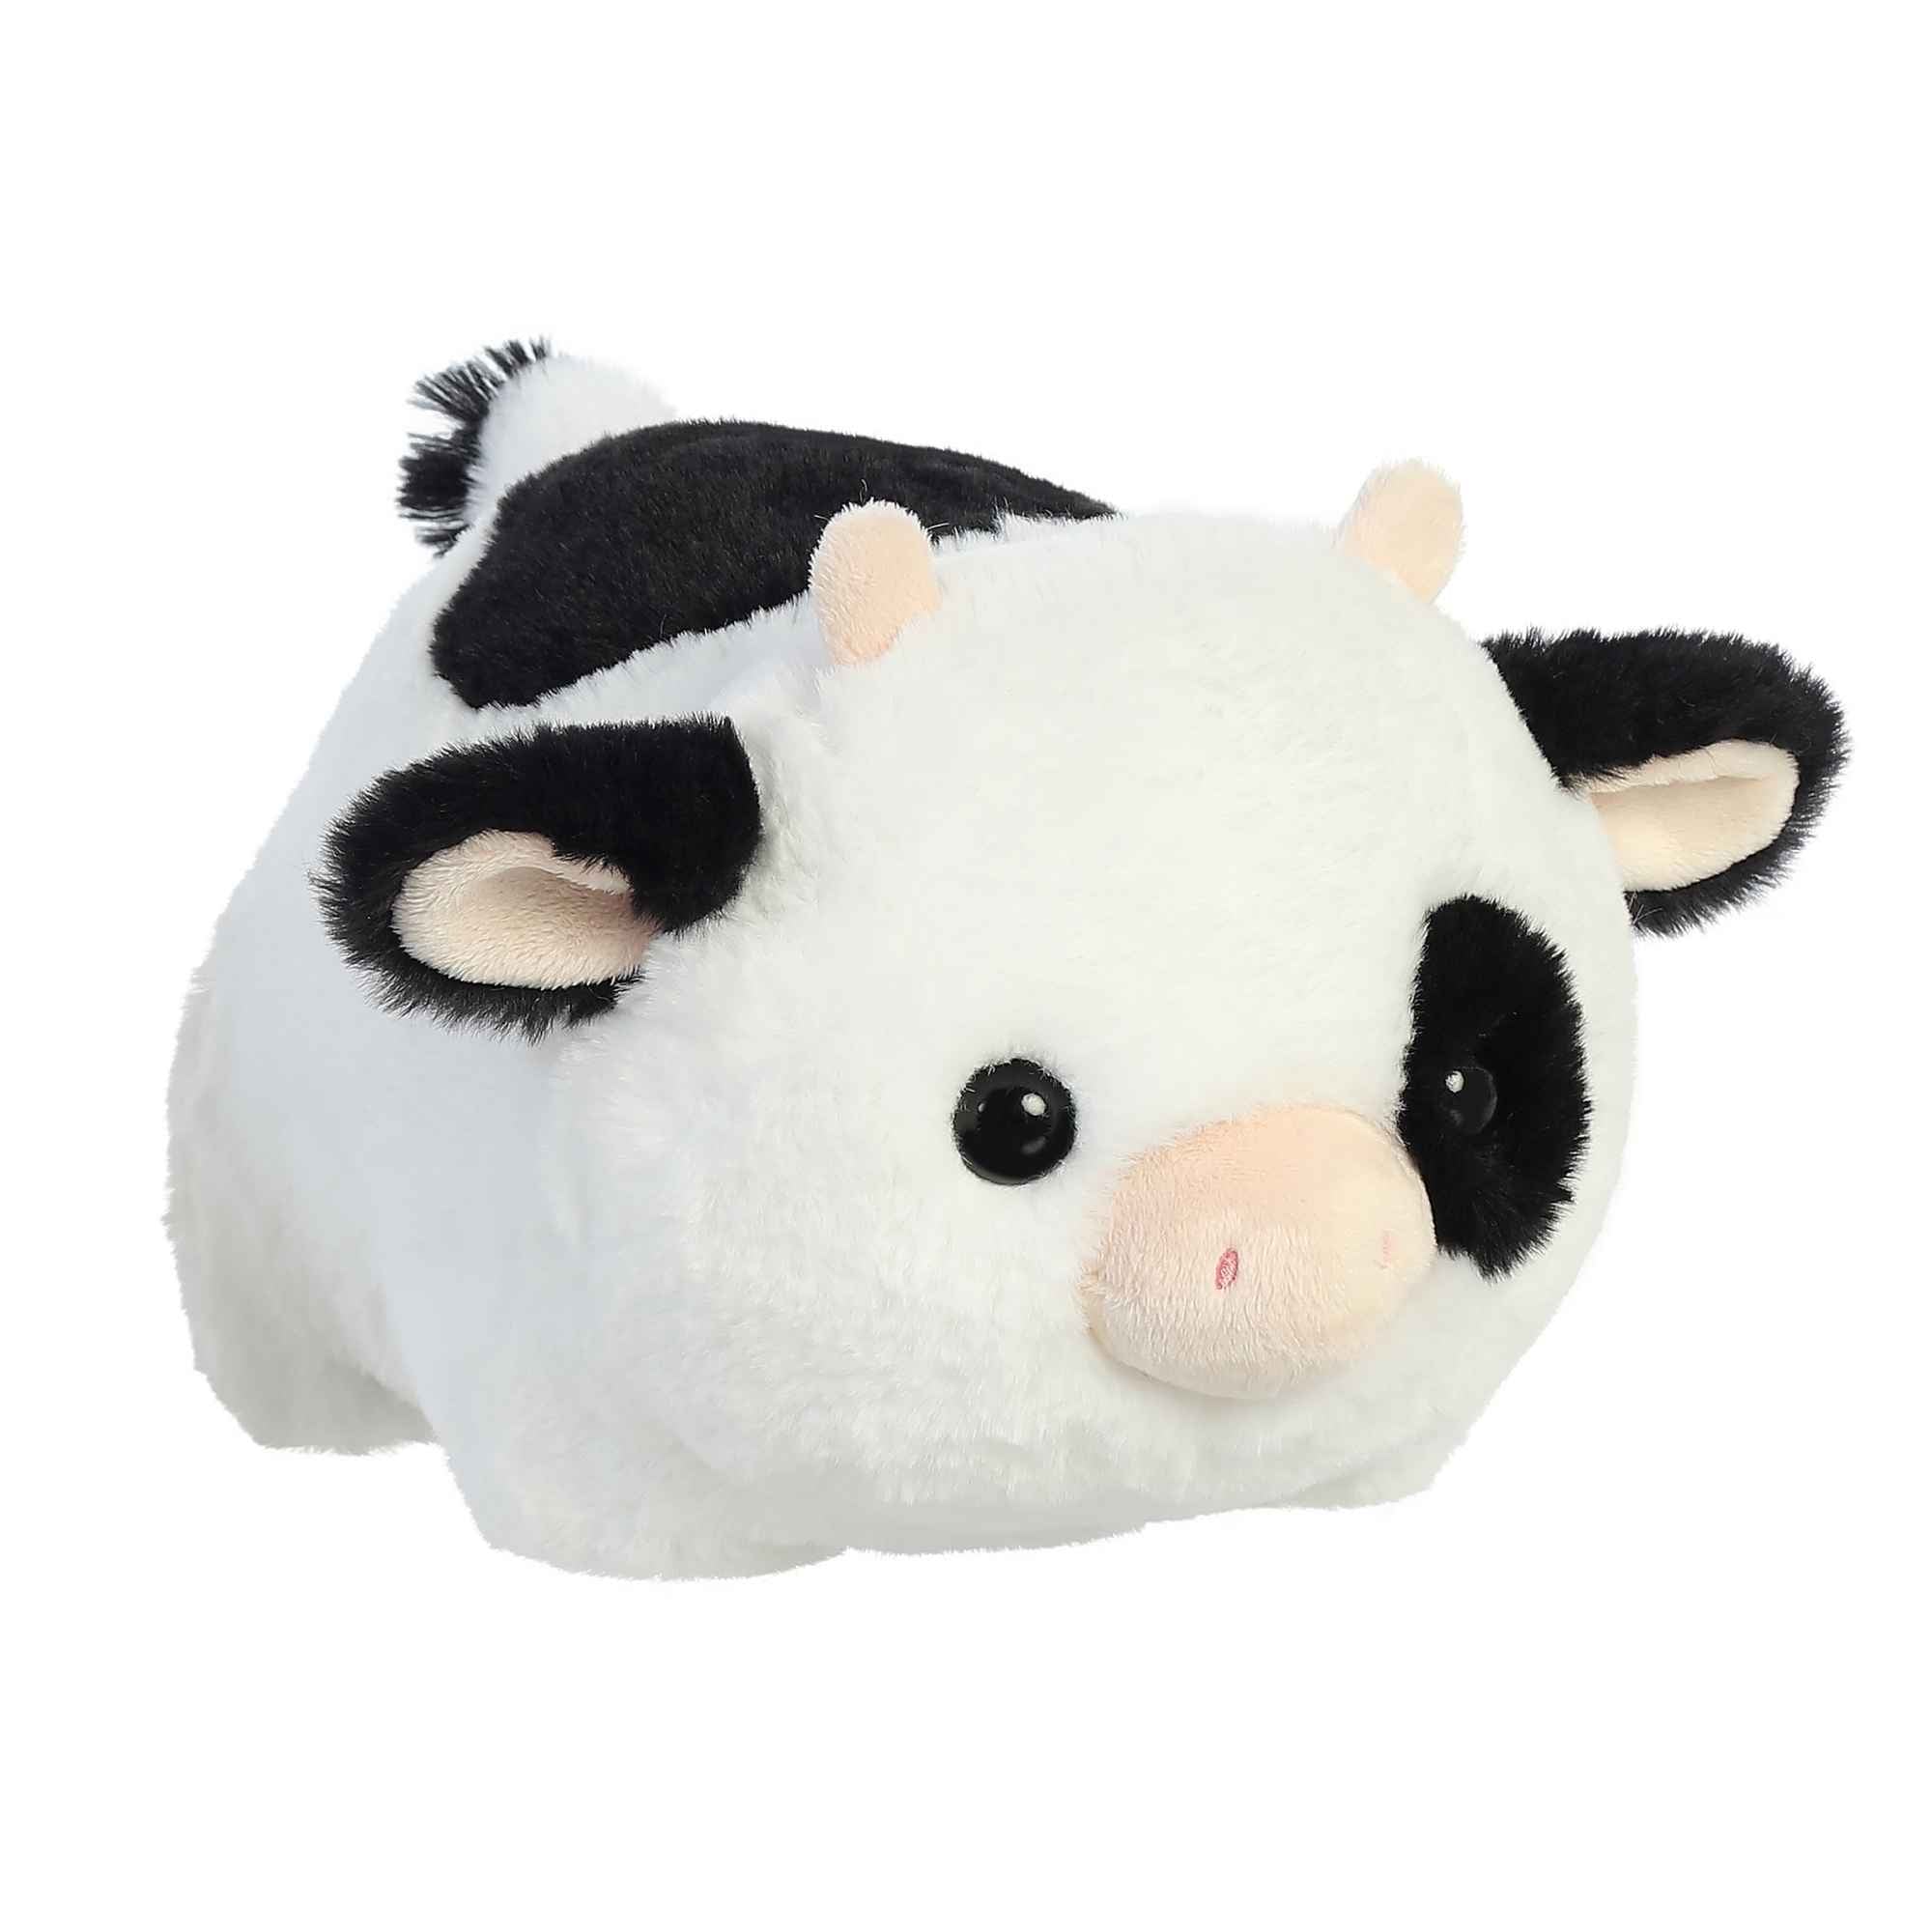 Aurora stuffed animals • Compare & see prices now »